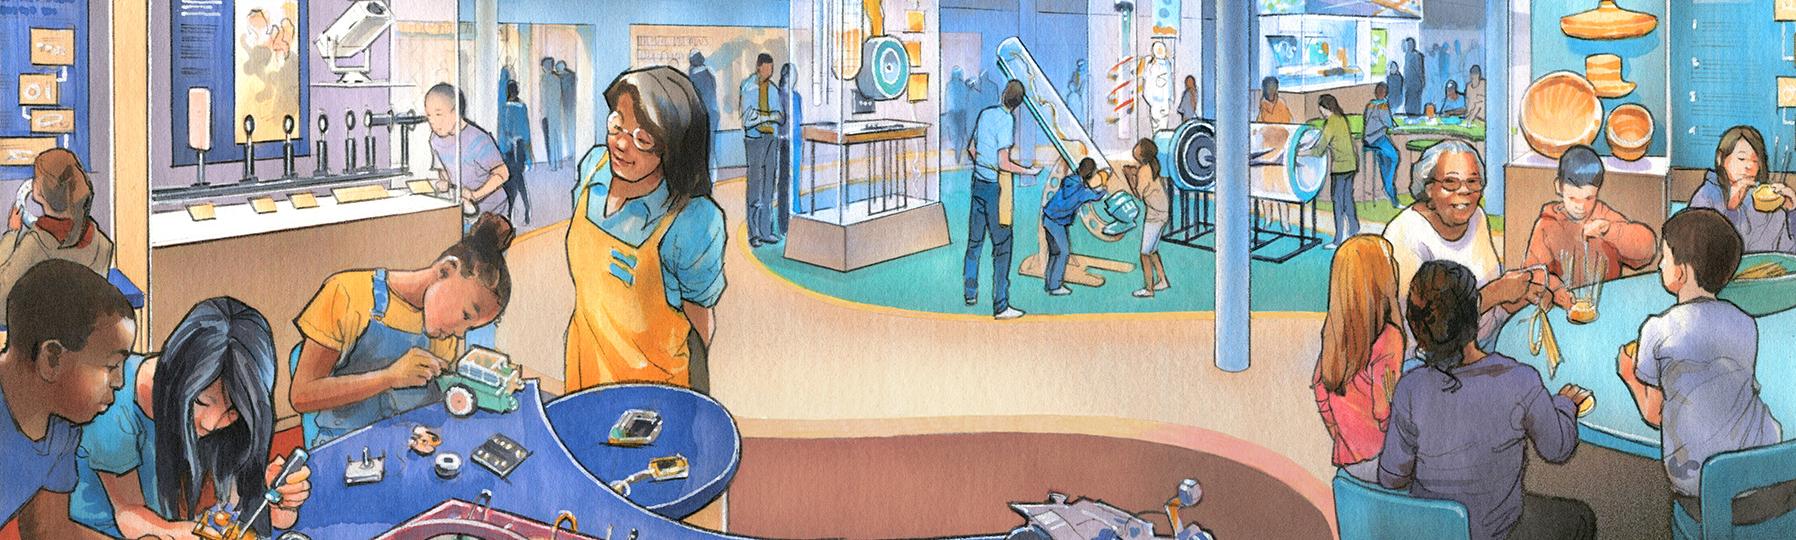 Colorful drawing depicts kids participating in hands-on experiments in the proposed Innovation Lab space